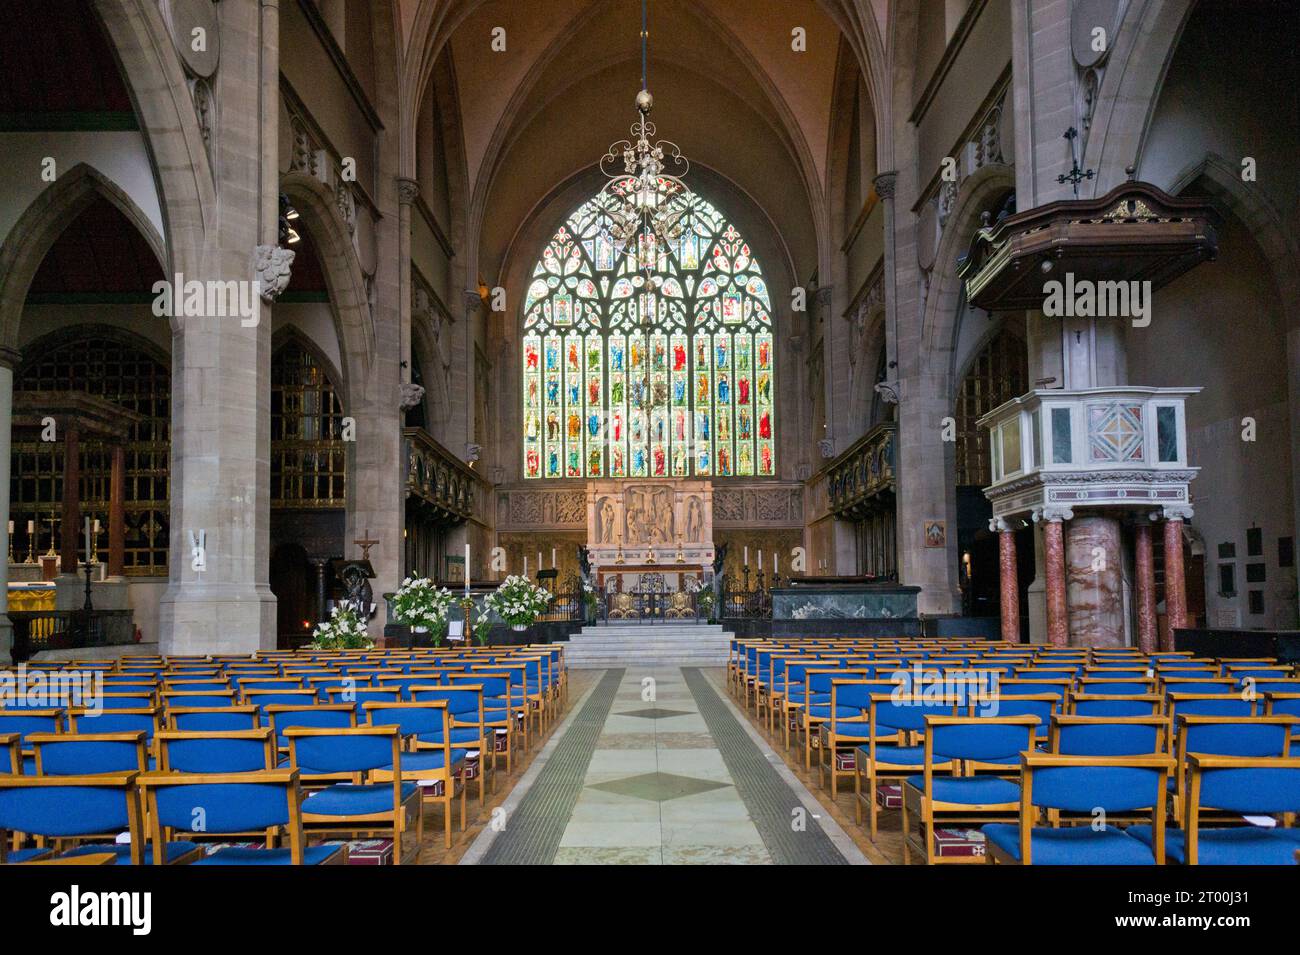 Interior of Holy Trinity church  Sloane Street, London; built 1890 in the Arts and Crafts style by the architect John Dando Sedding. Stock Photo